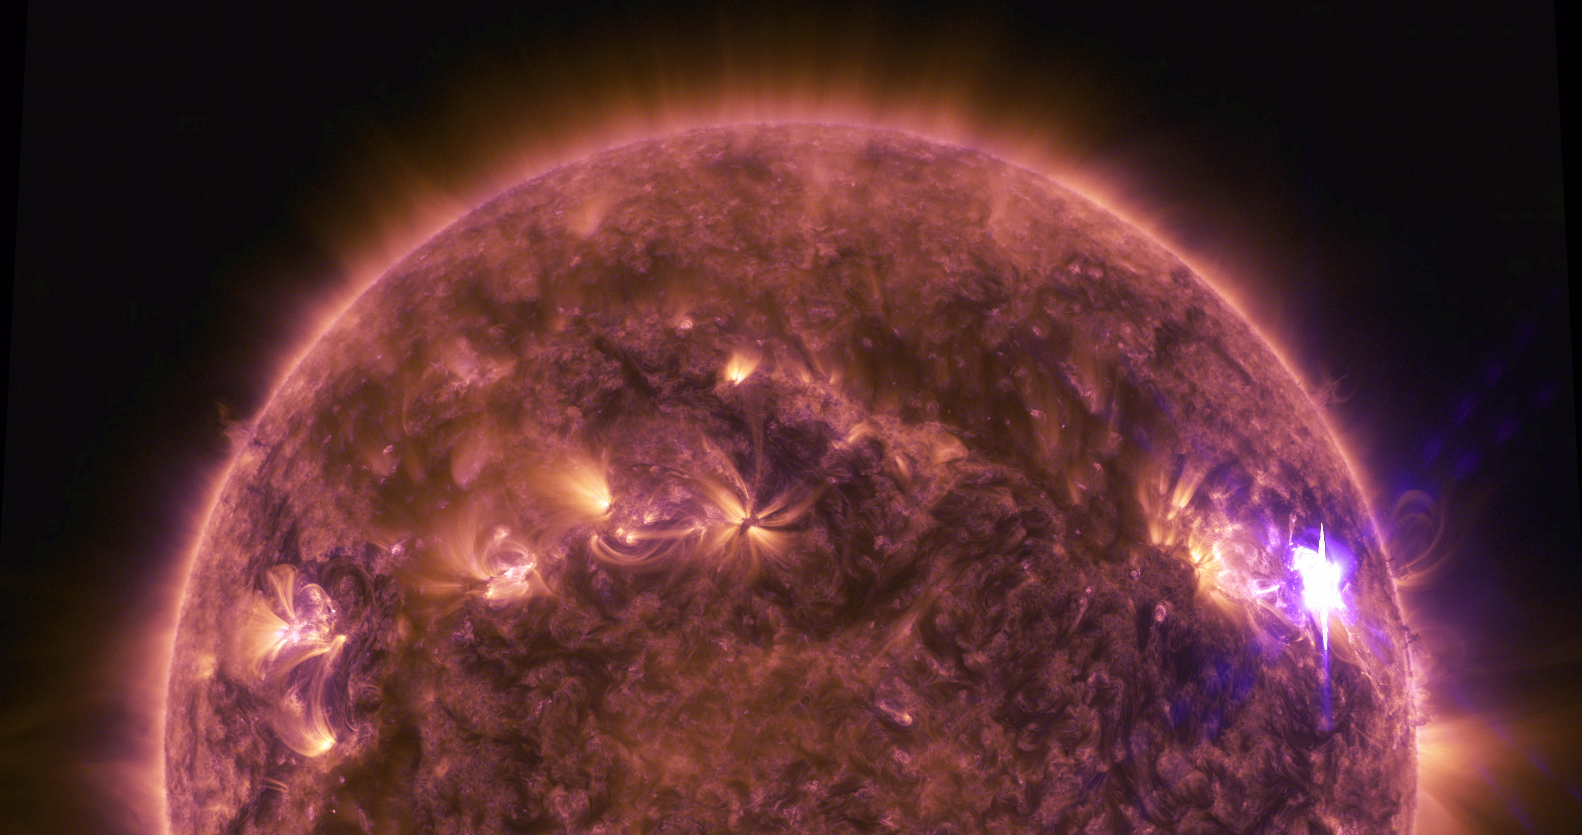 An image of the Sun during a solar flare. The Sun appears as a half circle filling most of the image, its surface appearing in purple and orange swirls with darker and lighter areas. The solar flare appears as a bright, whitish-purple spot on the right side of the Sun, with faint, light orange filaments looping out of it and brighter orange glow shining out of that area. The background is solid black.